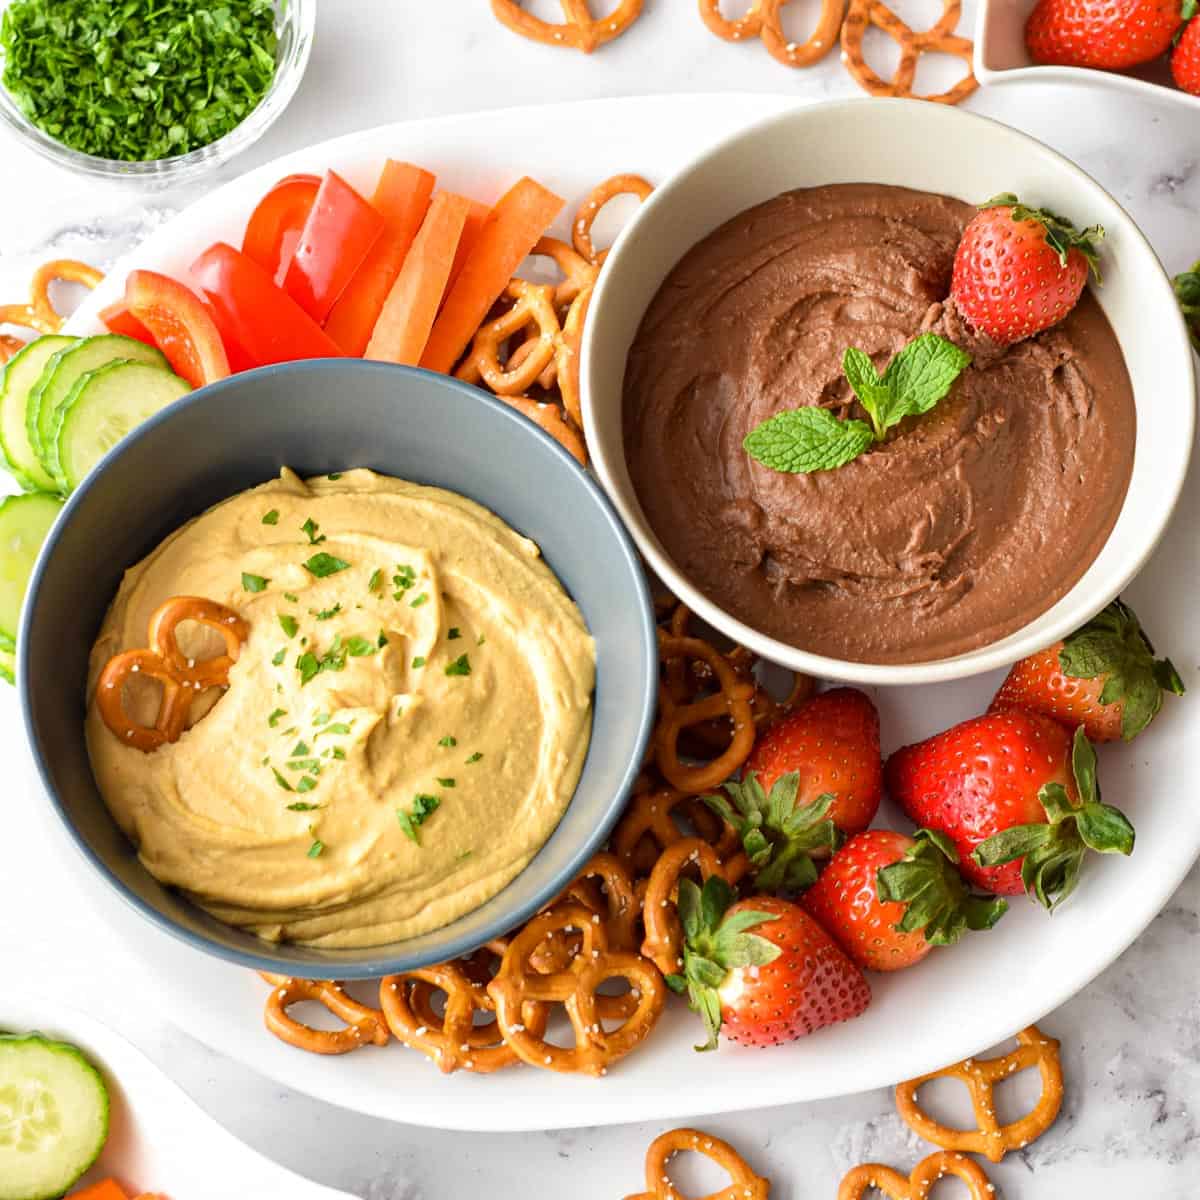 classic and dessert hummus in bowls on a platter with strawberries, pretzels, and chopped veggies